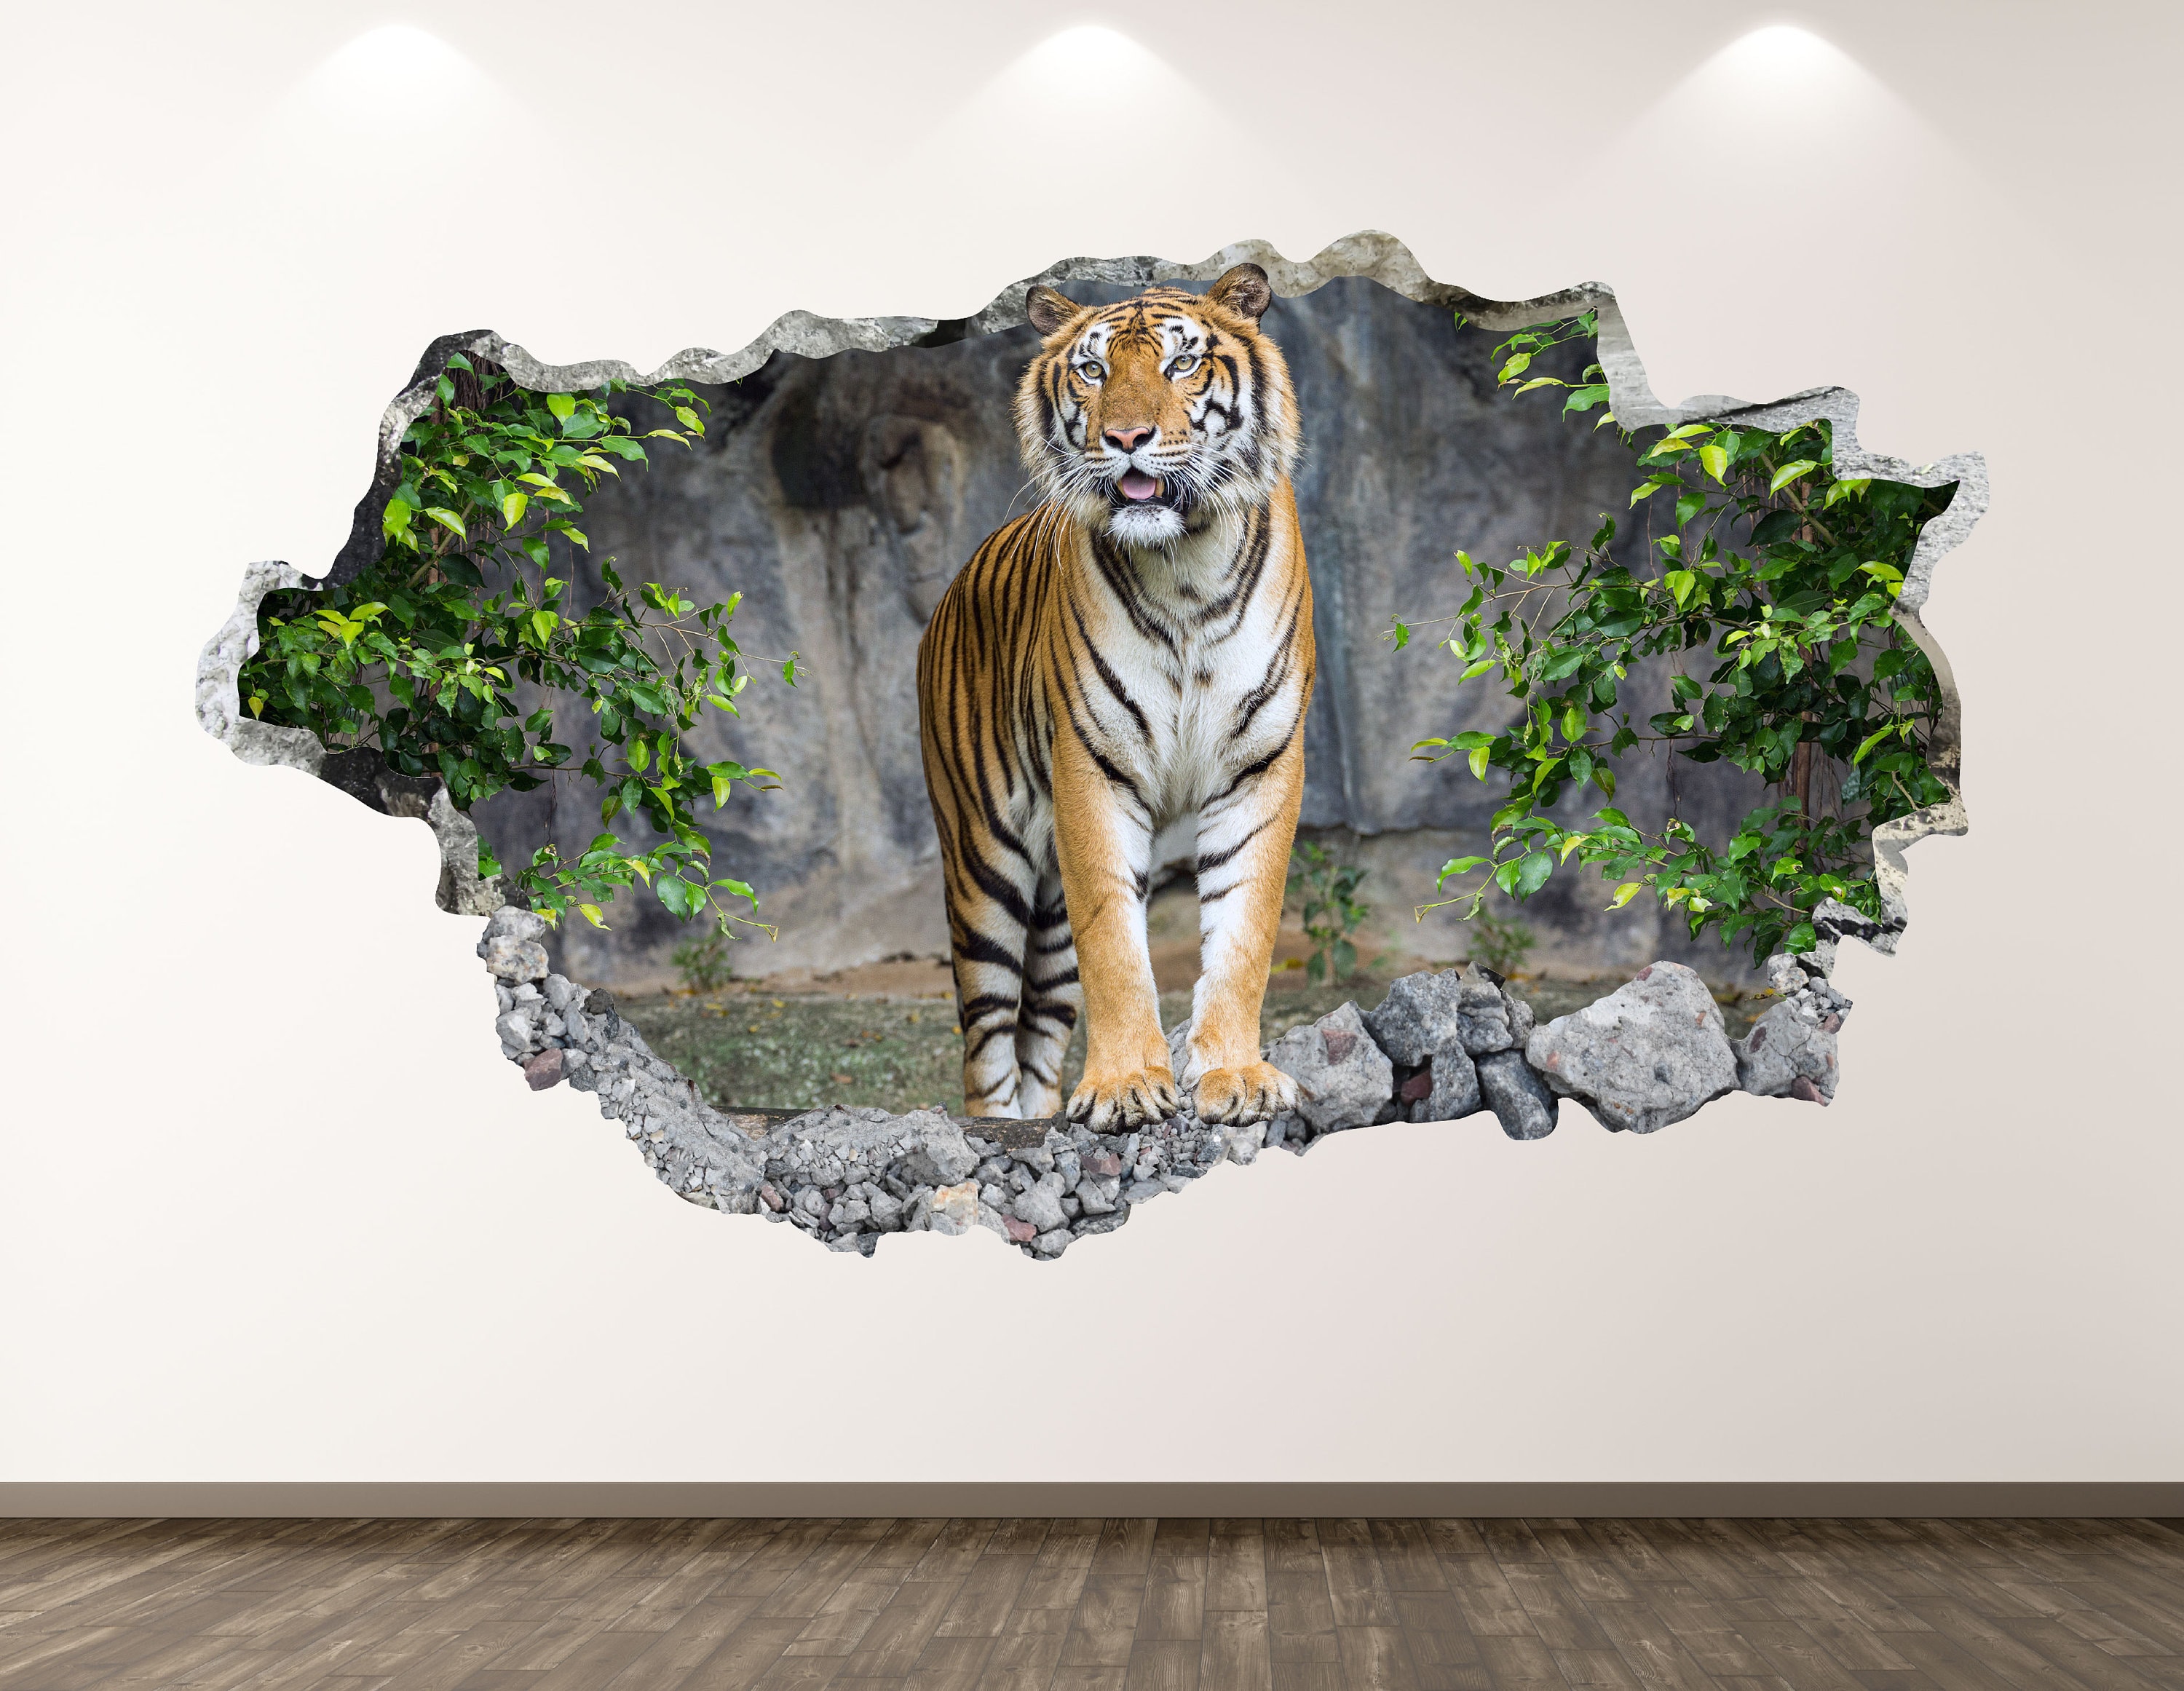 bedroom decor 3d smashed wall art removable decal home poster lion vinyl sticker Lion wall decal wild animal decal 3d smashed decal